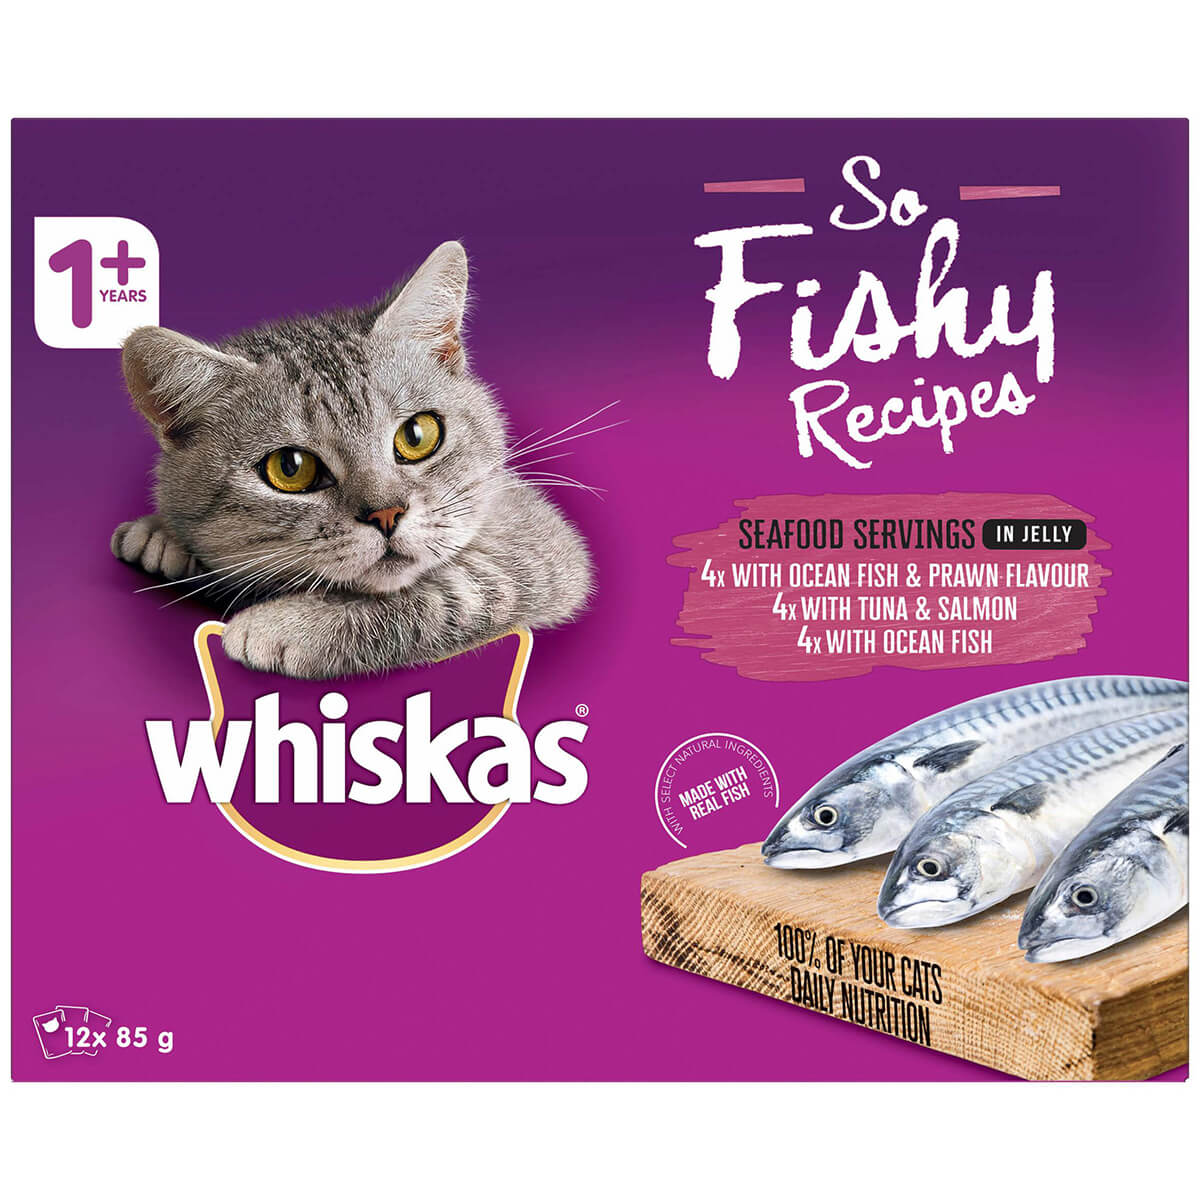 Whiskas Adult So Fishy Seafood in Jelly Wet Cat Food 12 x 85g